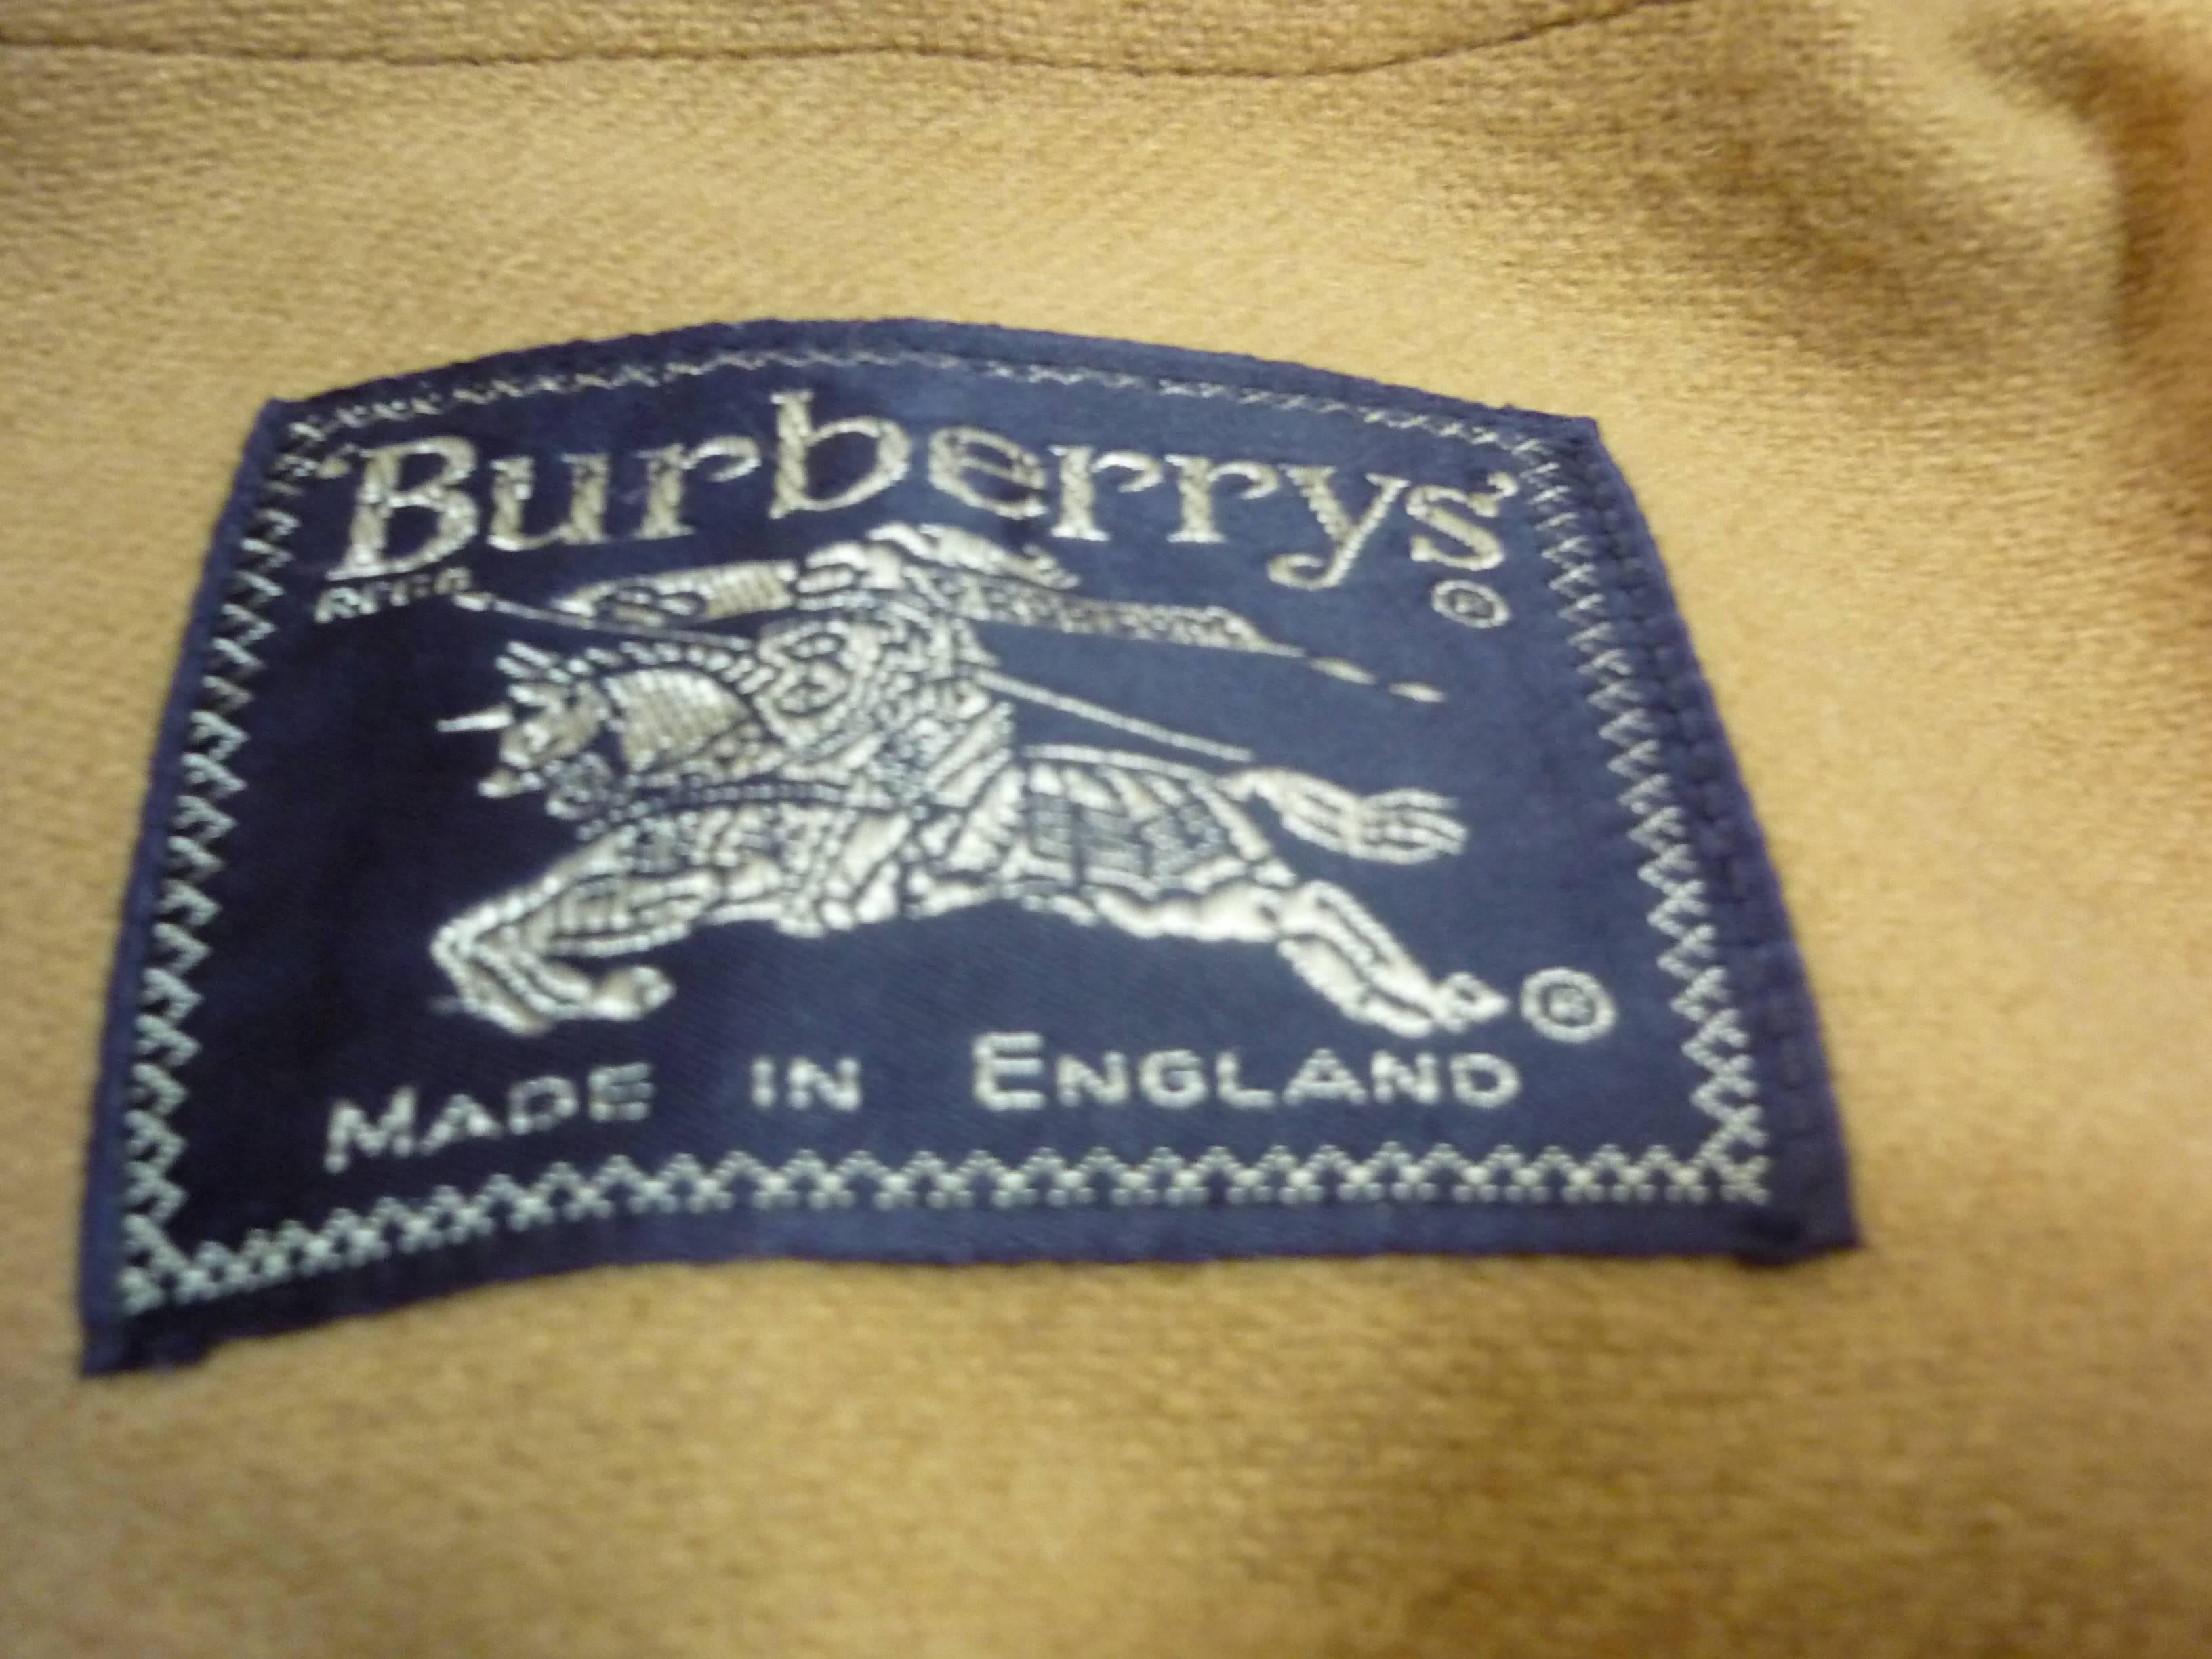 1980s Burberrys' Long Heritage Trench Coat 6/8 3